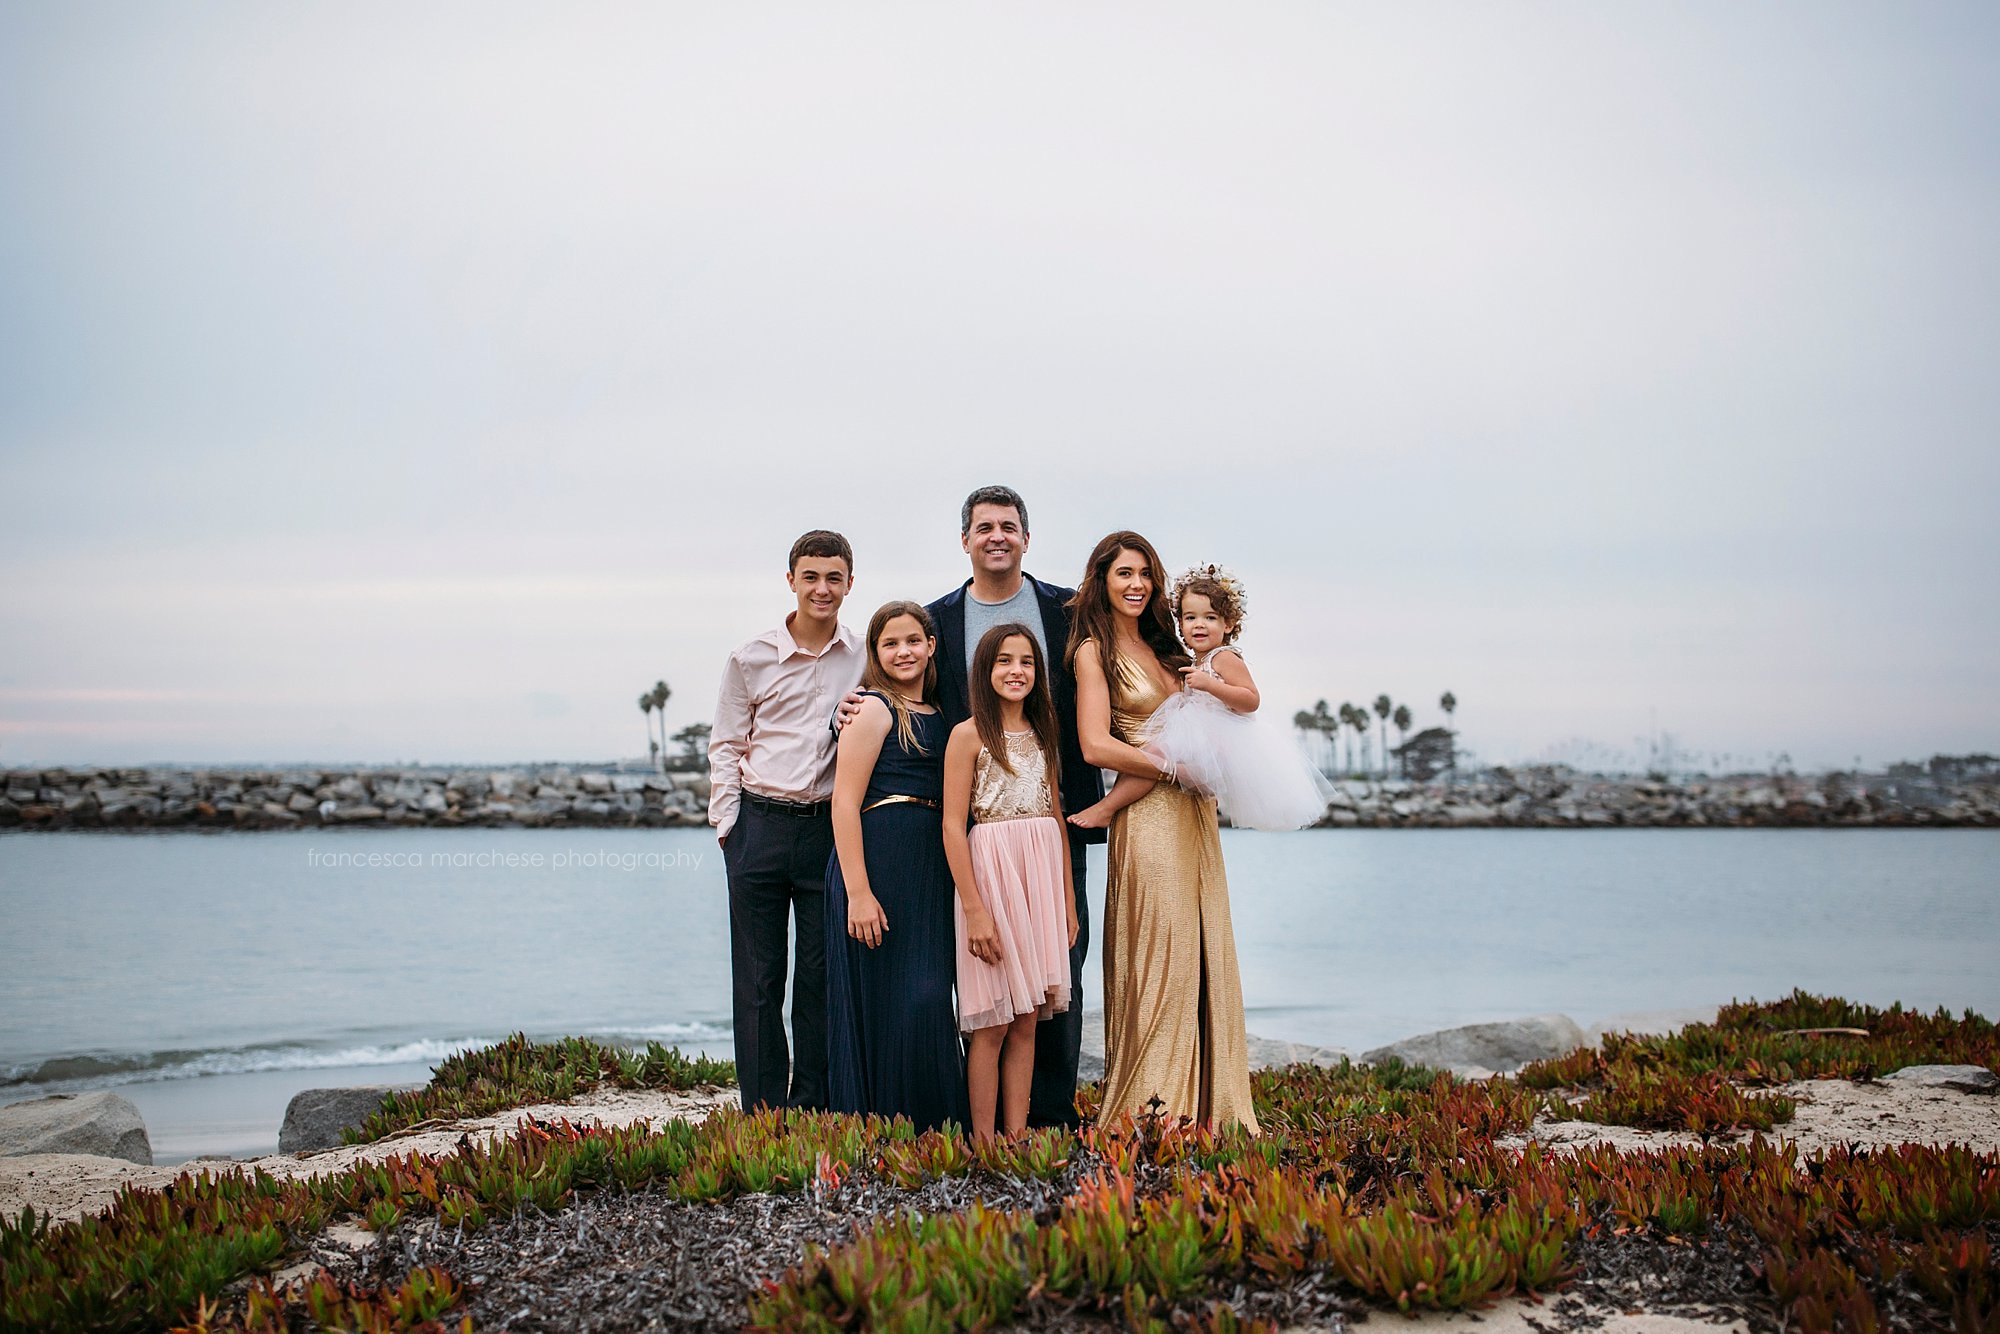 Francesca Marchese Photography - Family Photographer Starkman Family sunset beach session - family of 6 formal attire at the beach